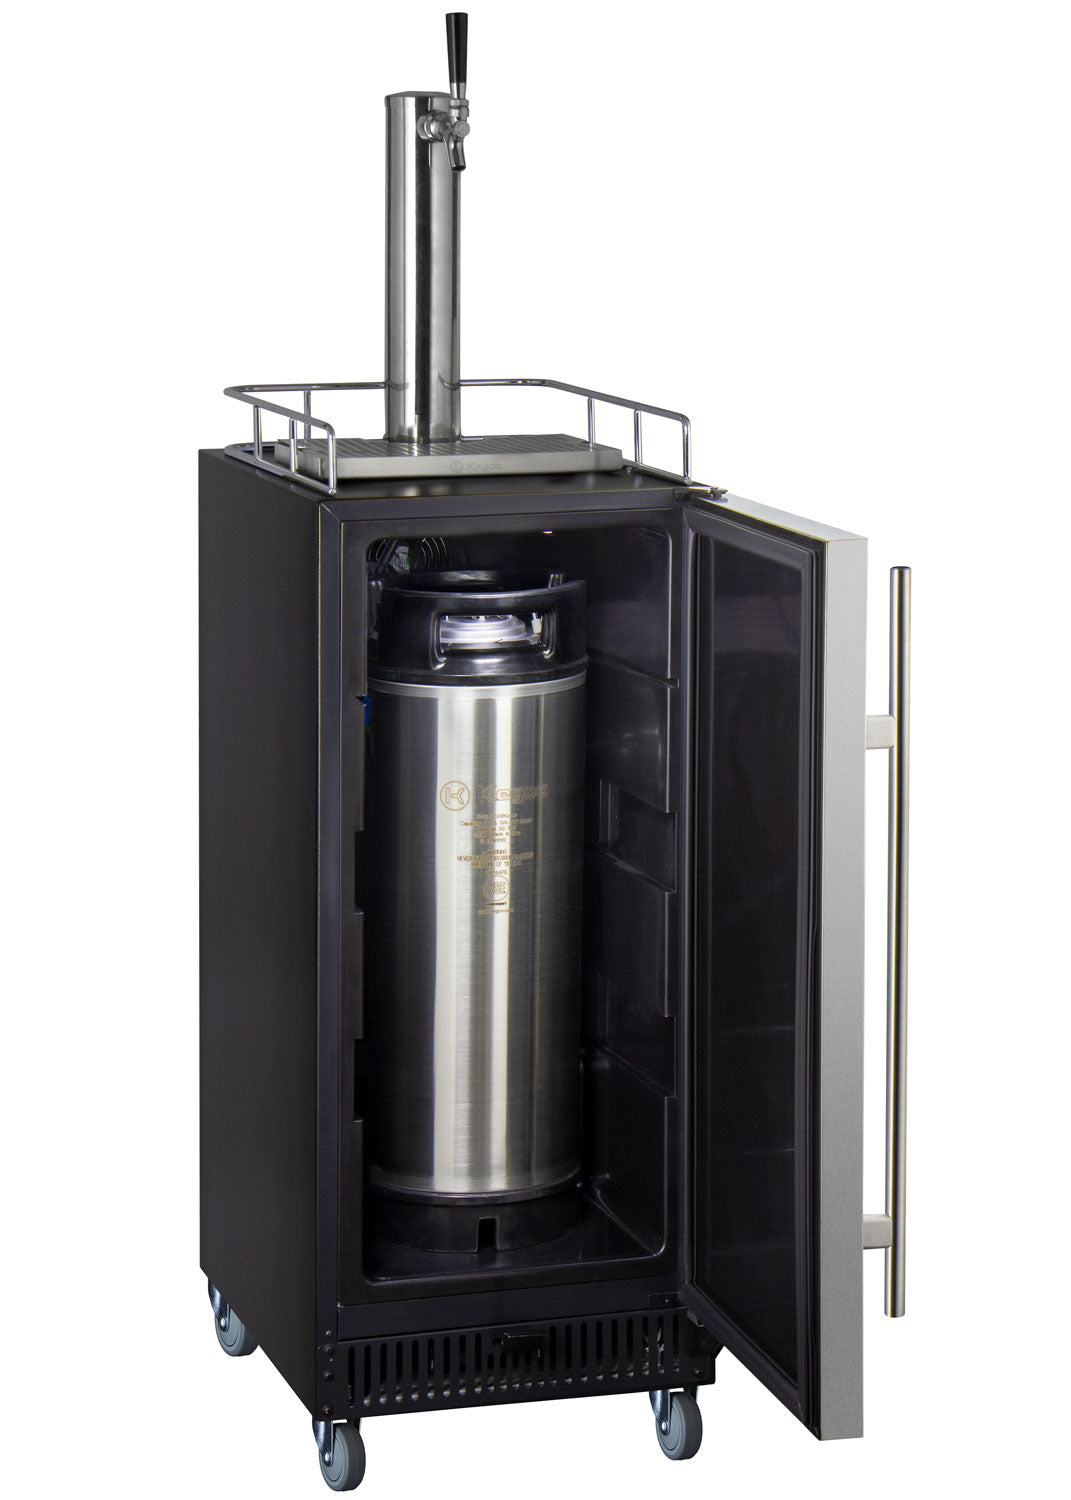 15" Wide Commercial Cold Brew Coffee Kegerator with Stainless Steel Door